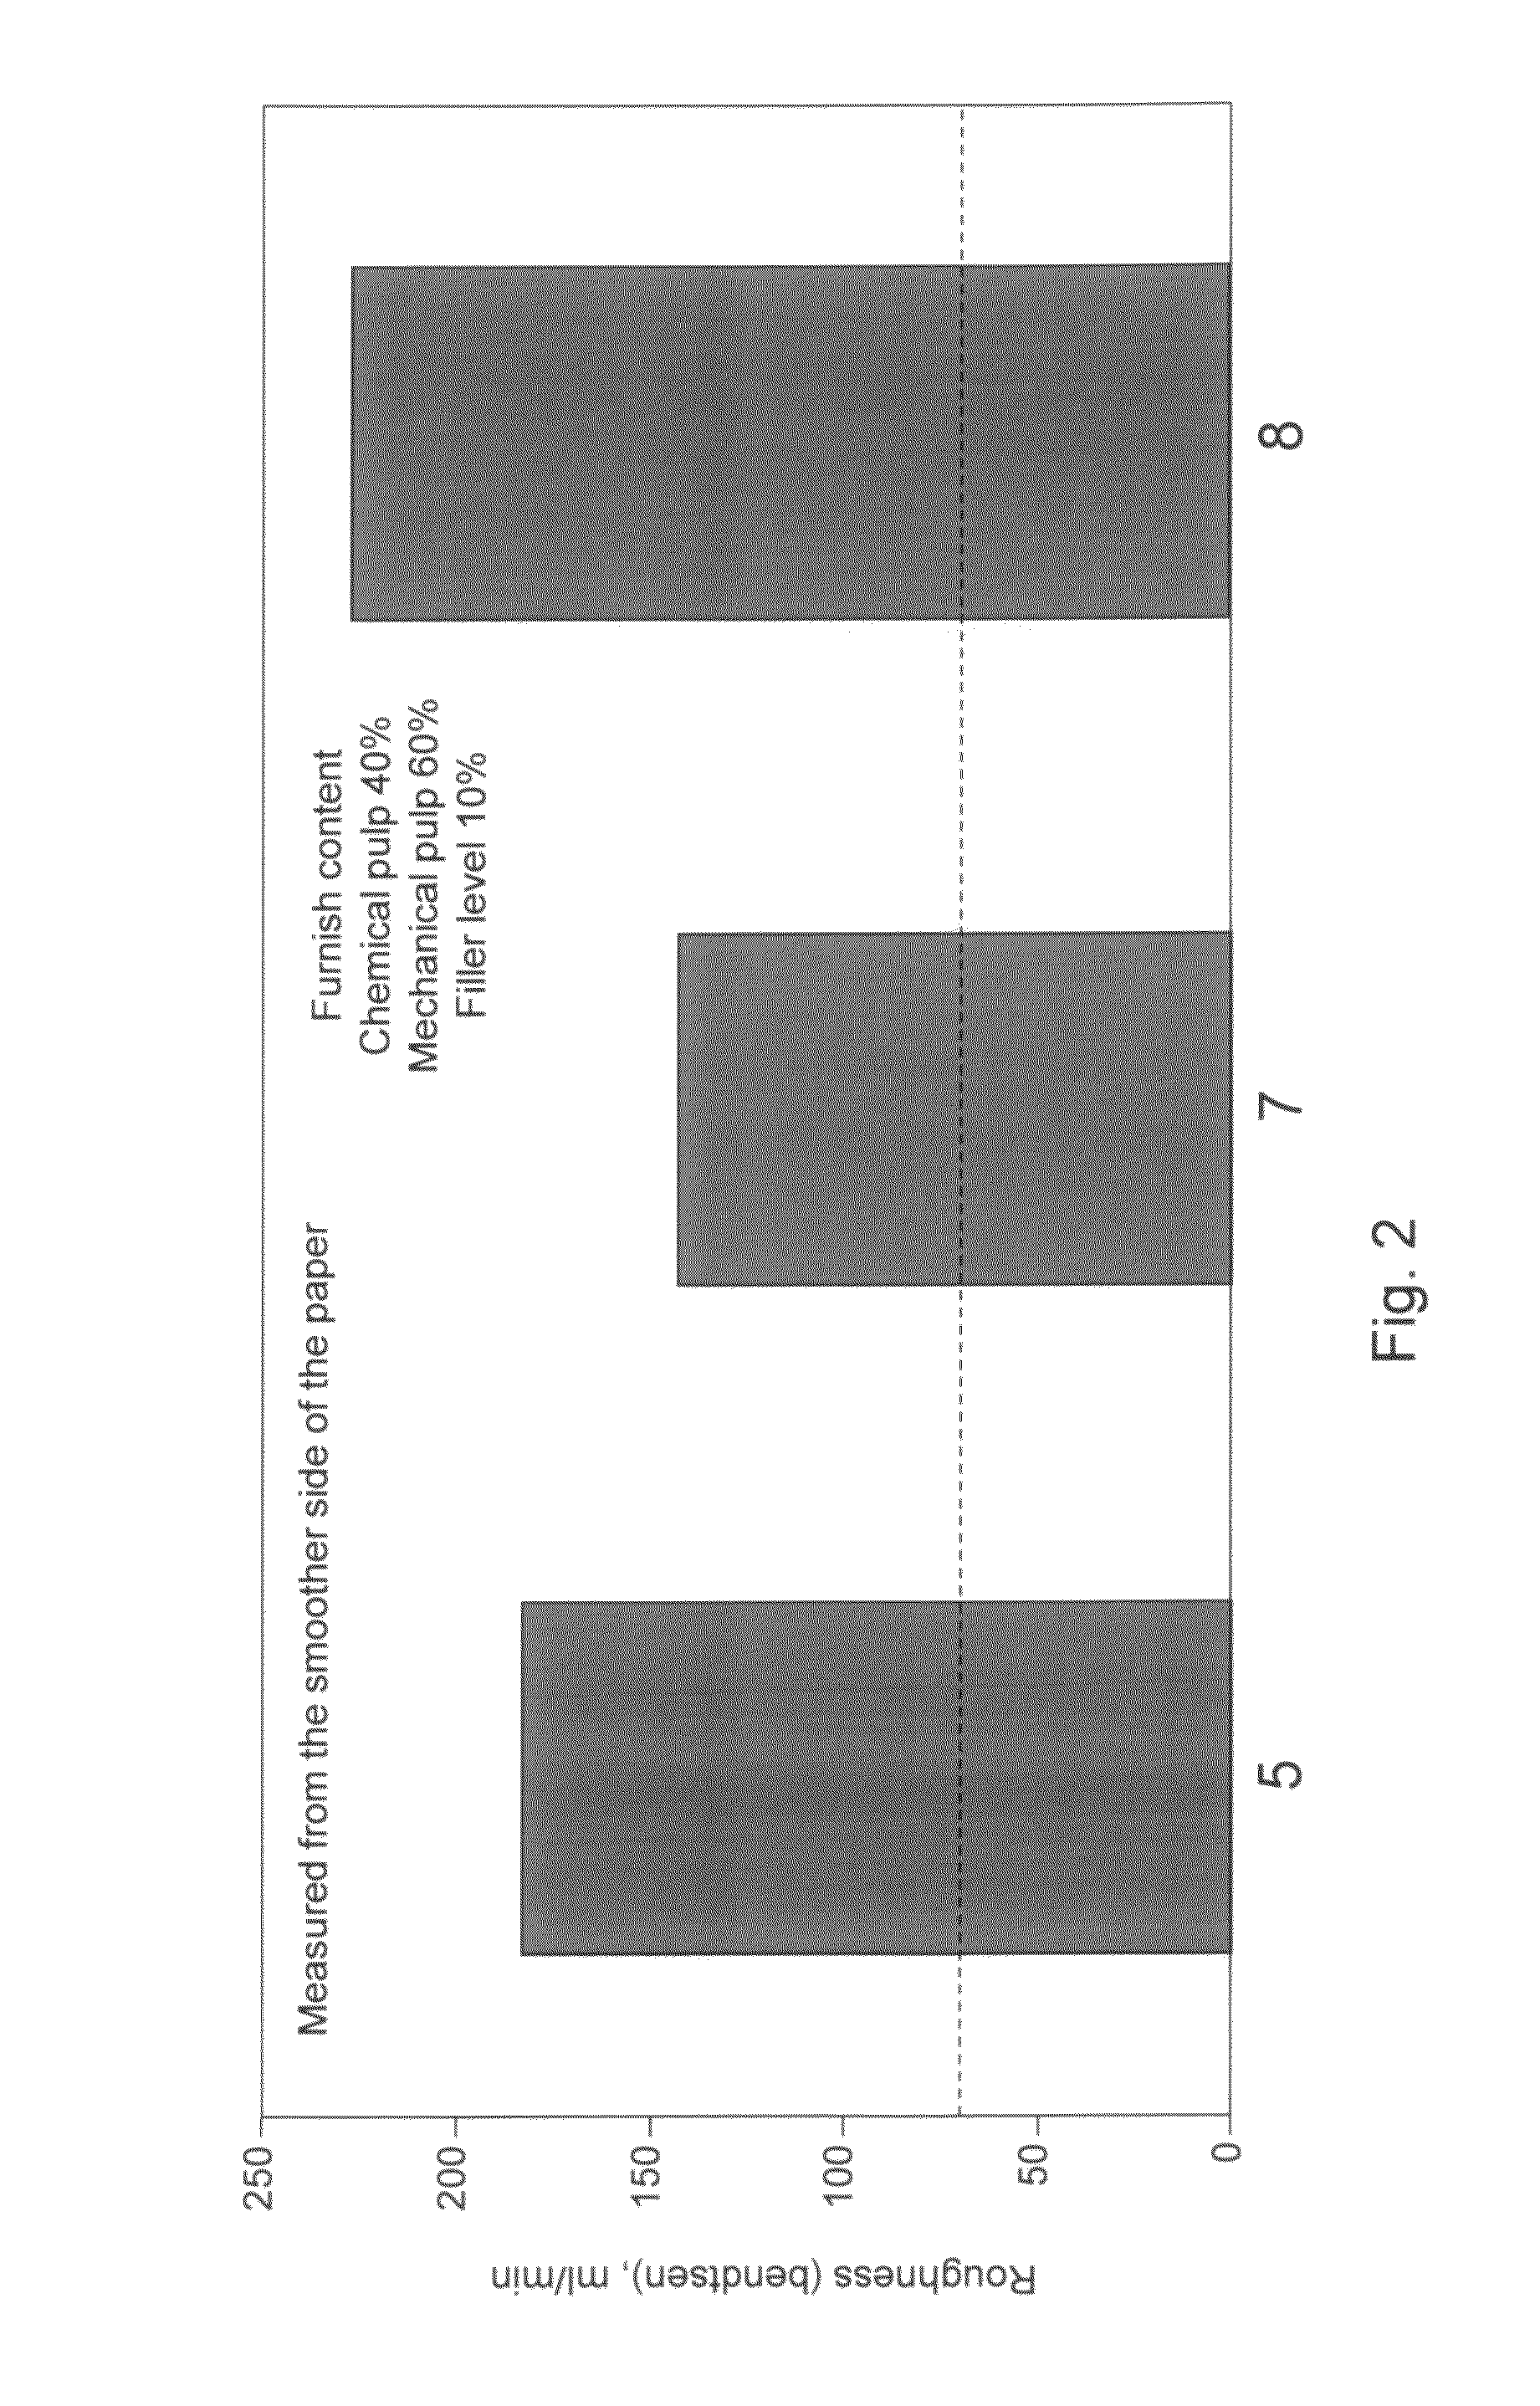 Method for producing fiber product